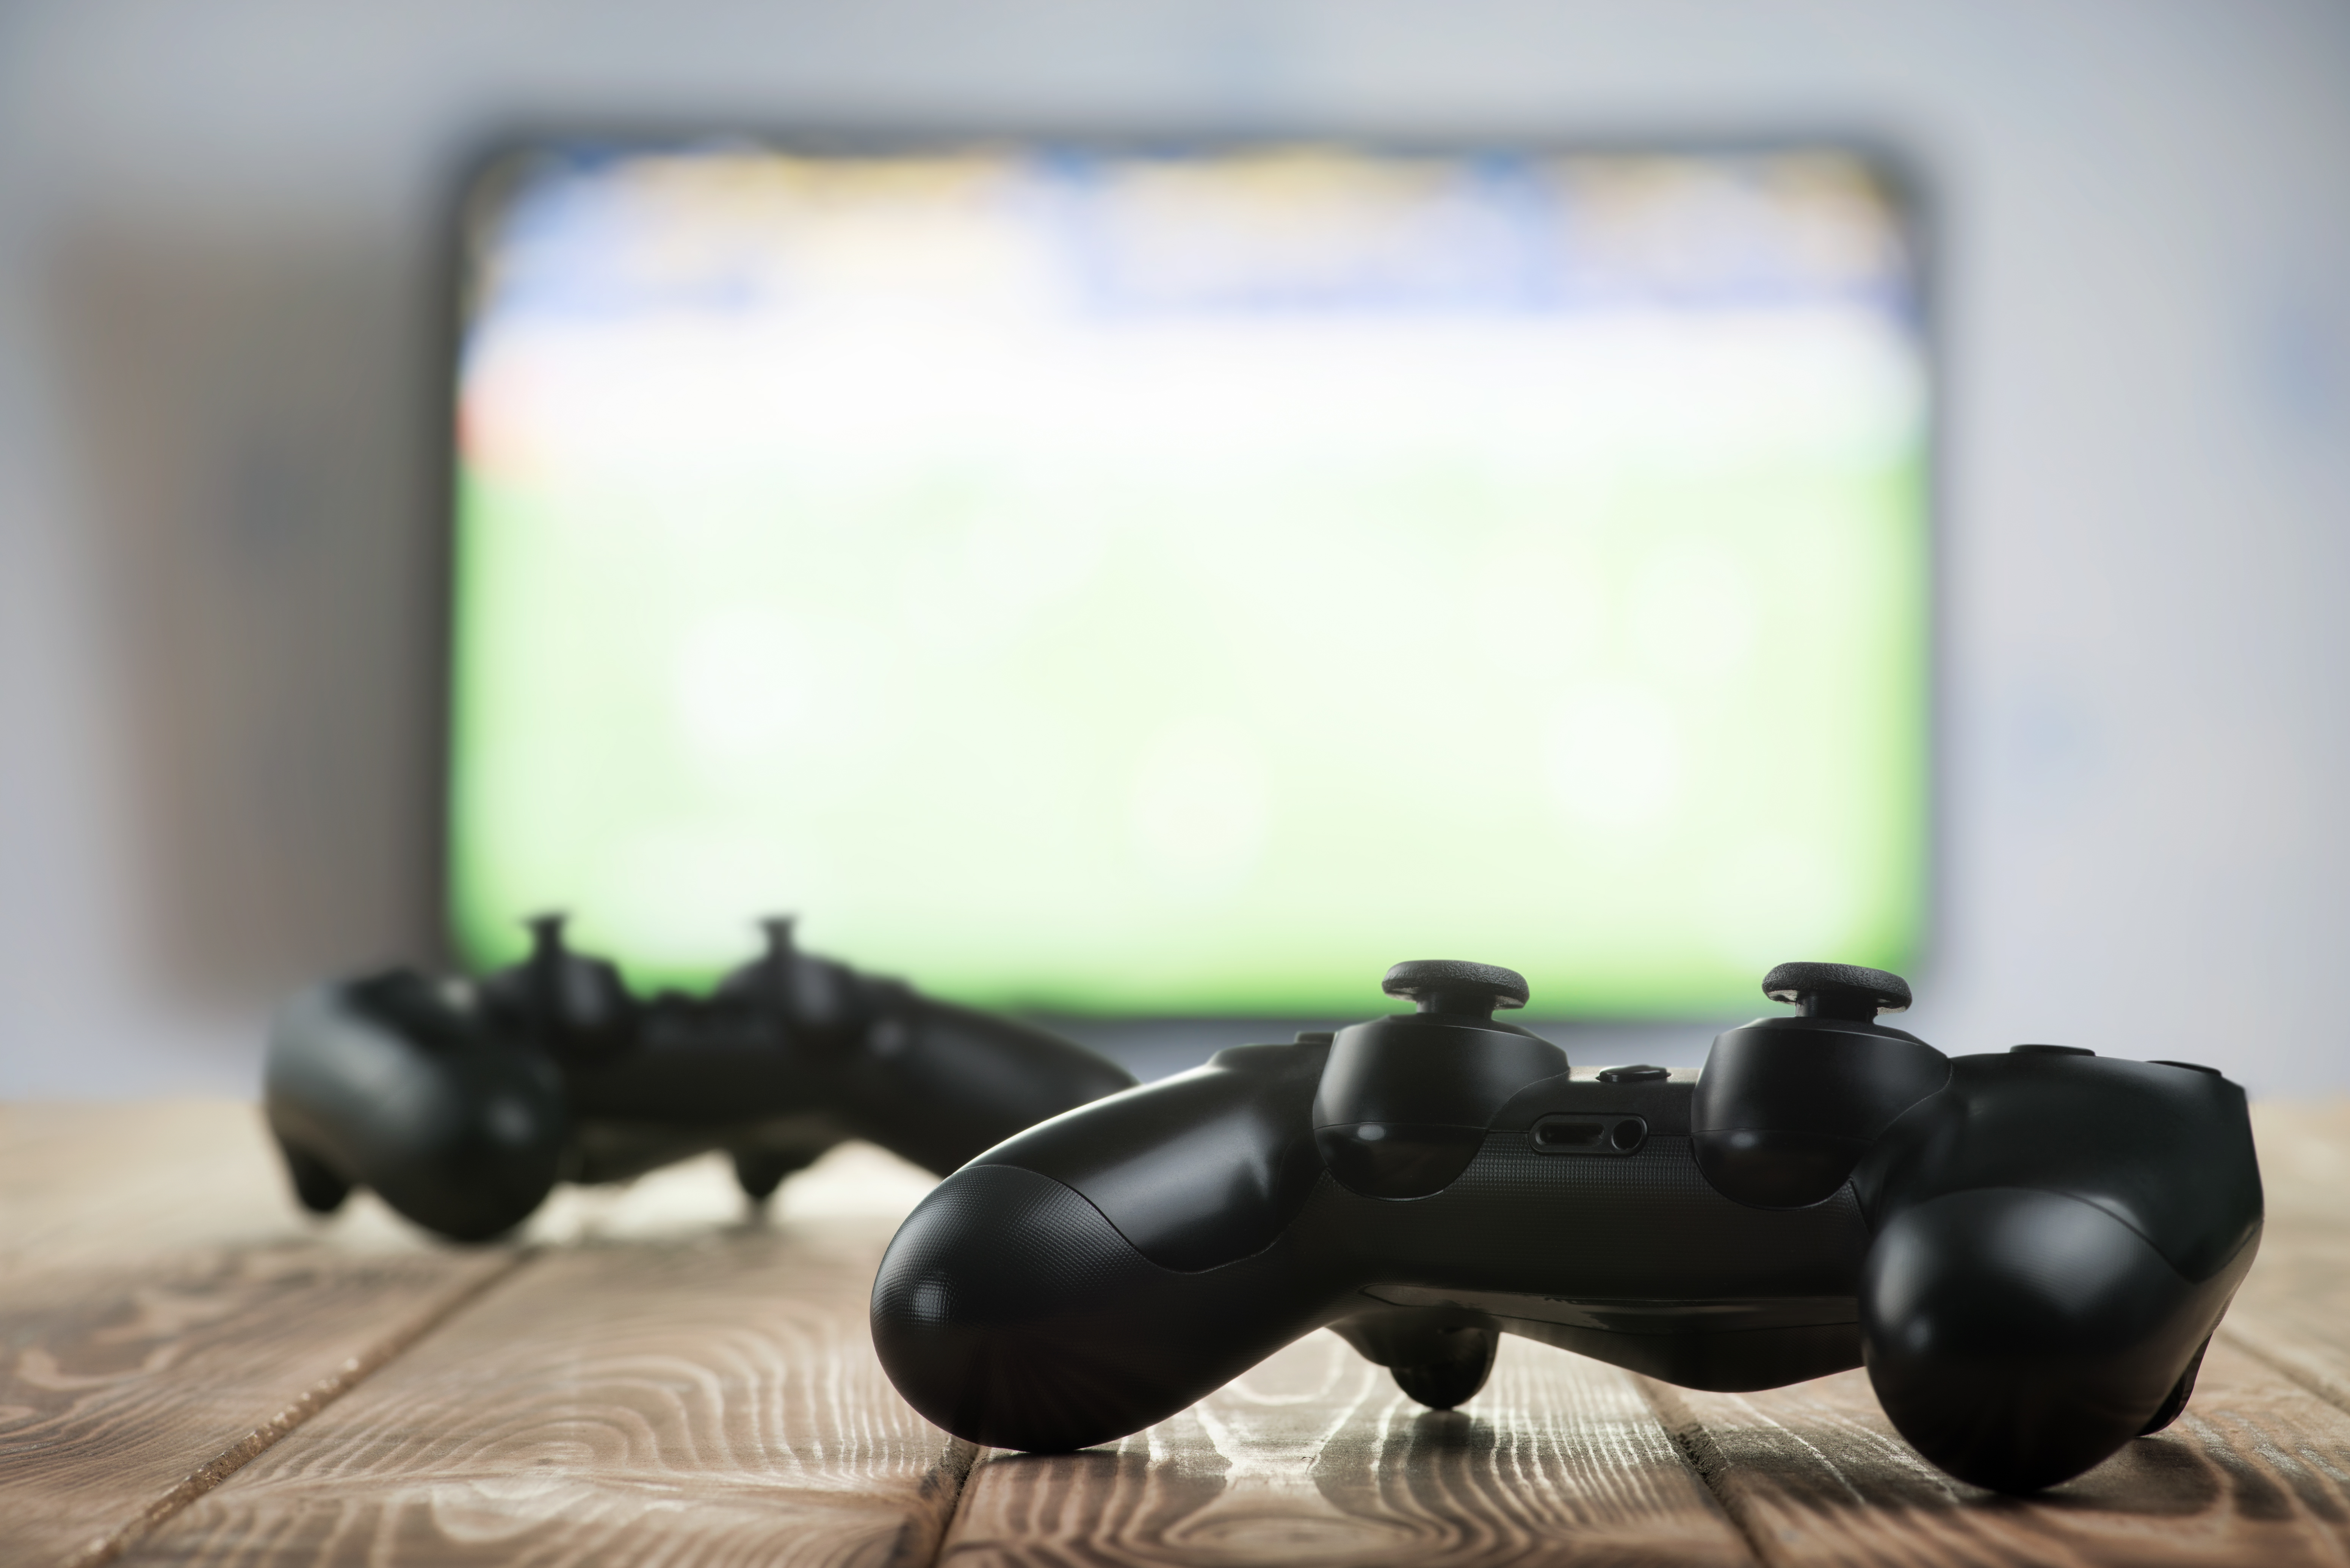 Close up view of two game controllers sitting on a wooden table with a blurred out TV screen in the background